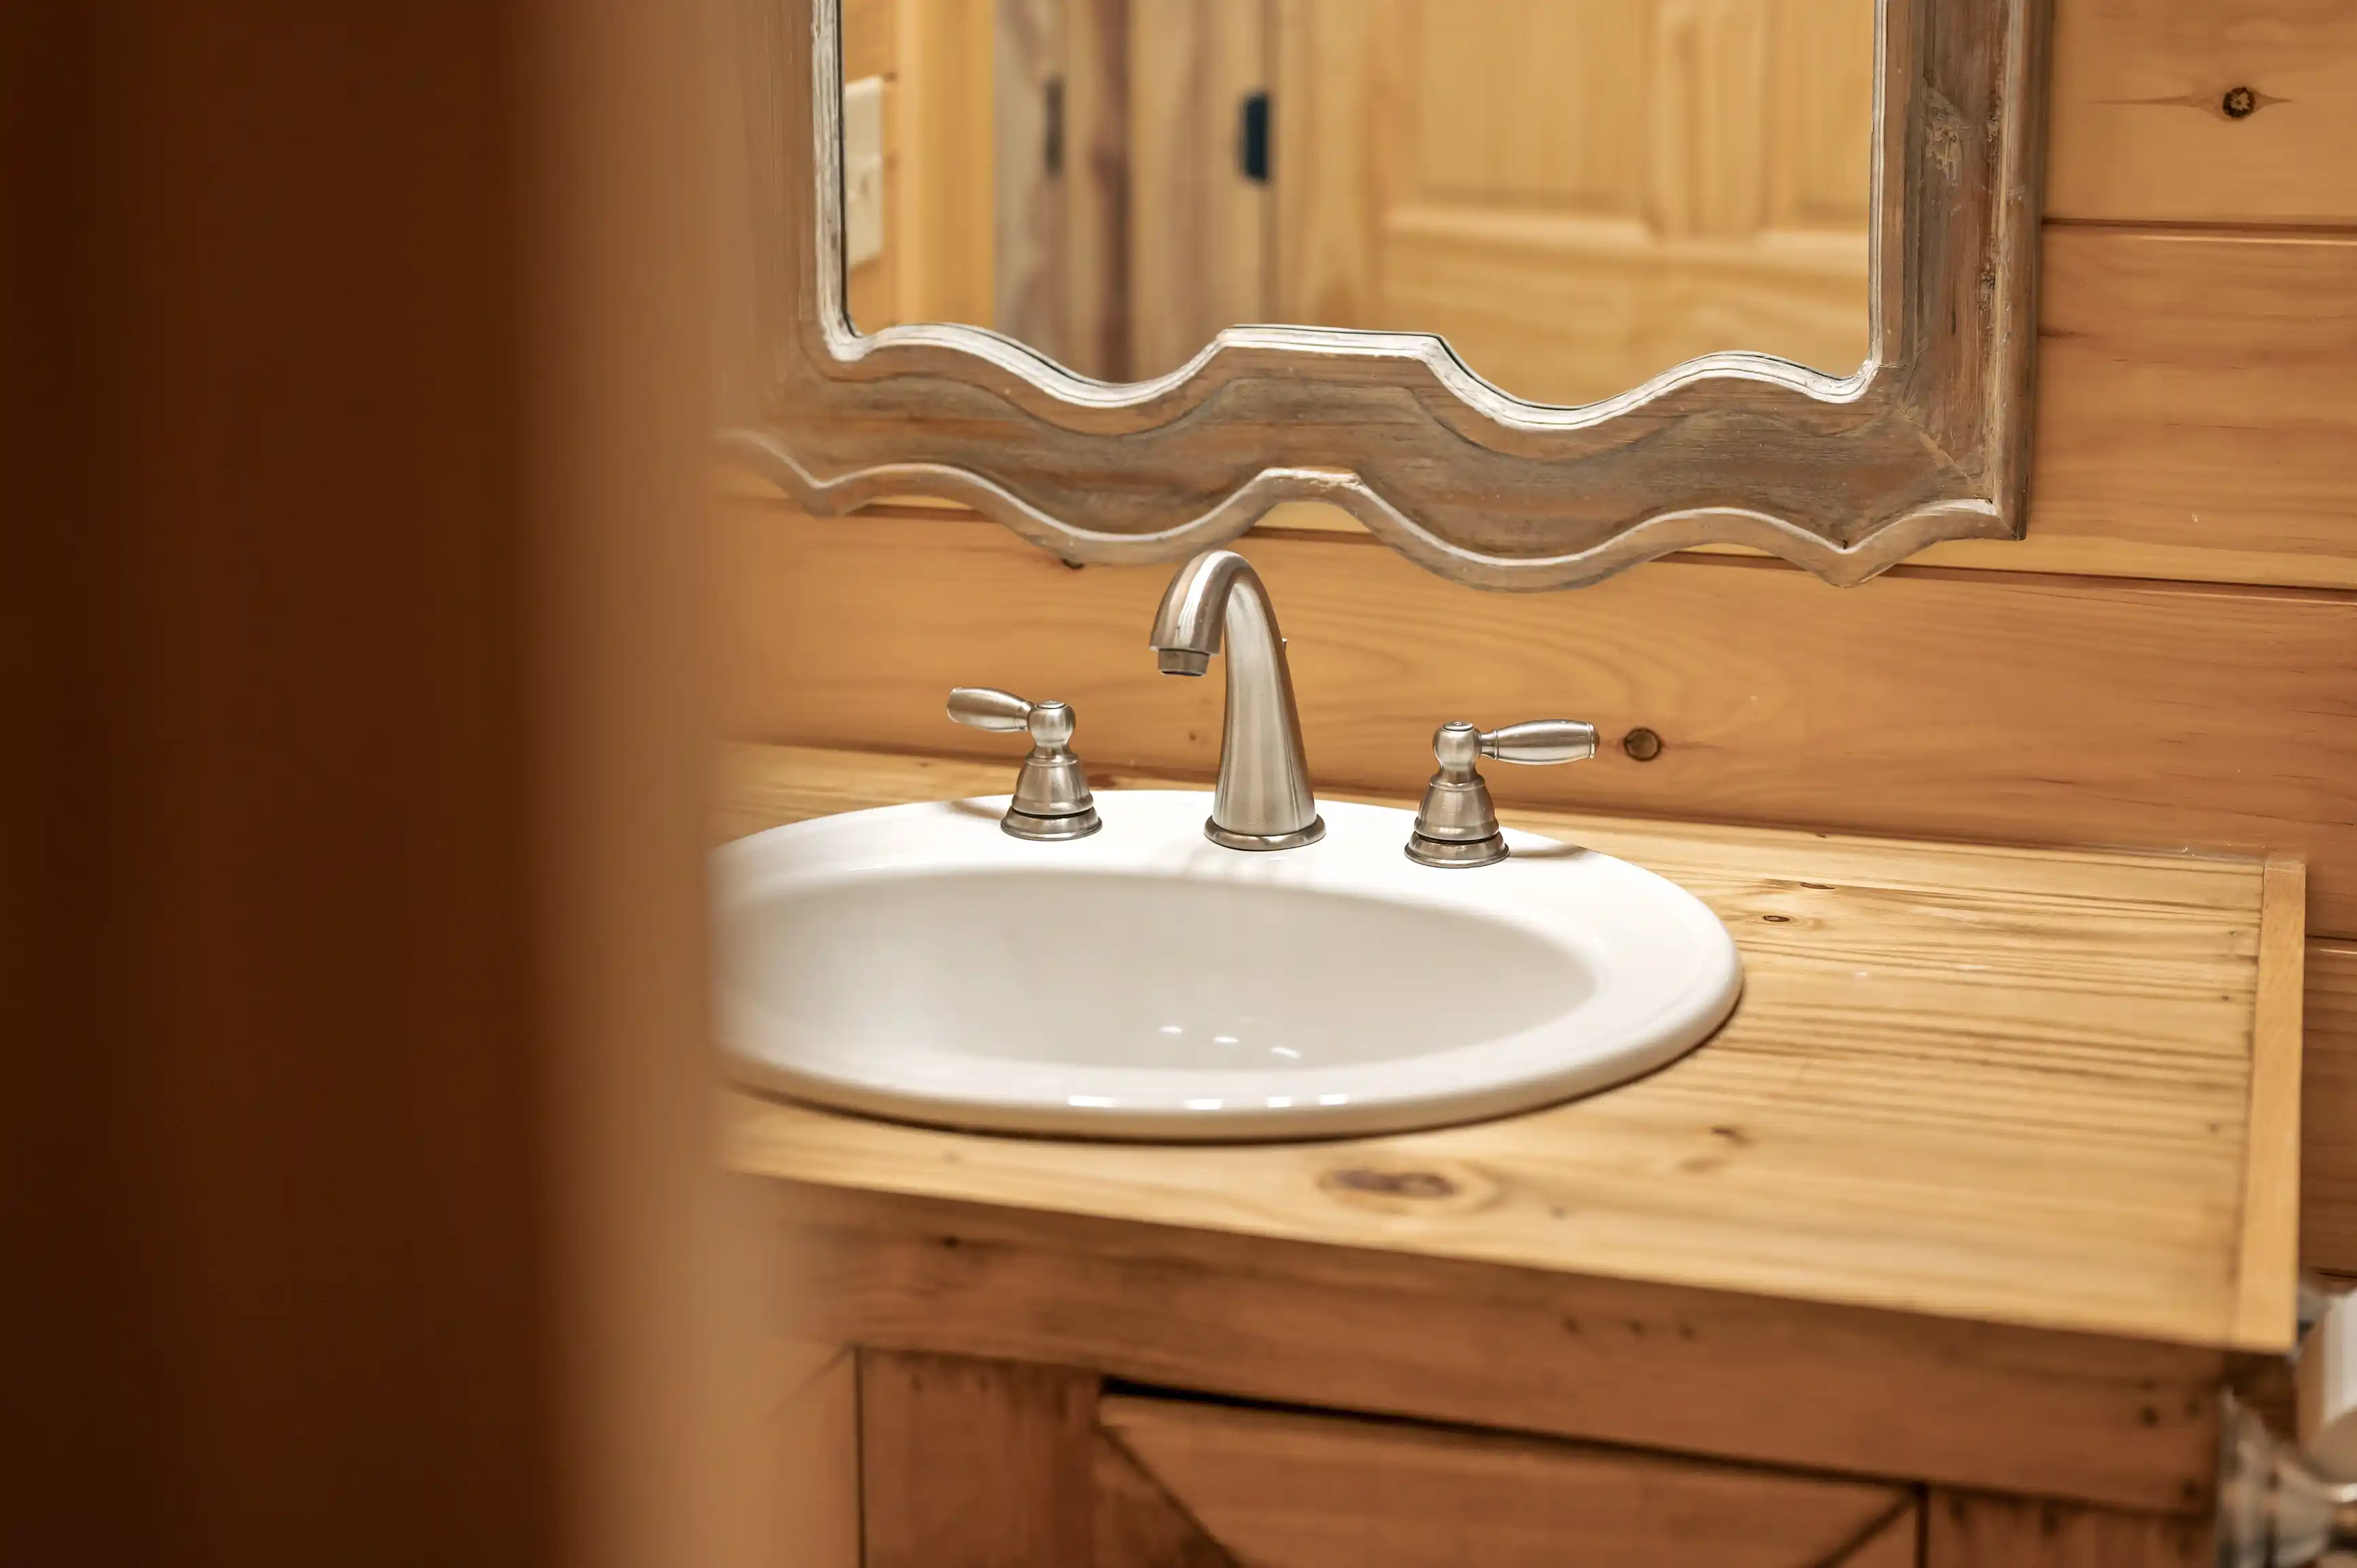 Rustic wooden bathroom interior with a white ceramic sink, silver faucet, and a decorative mirror on a wooden wall.